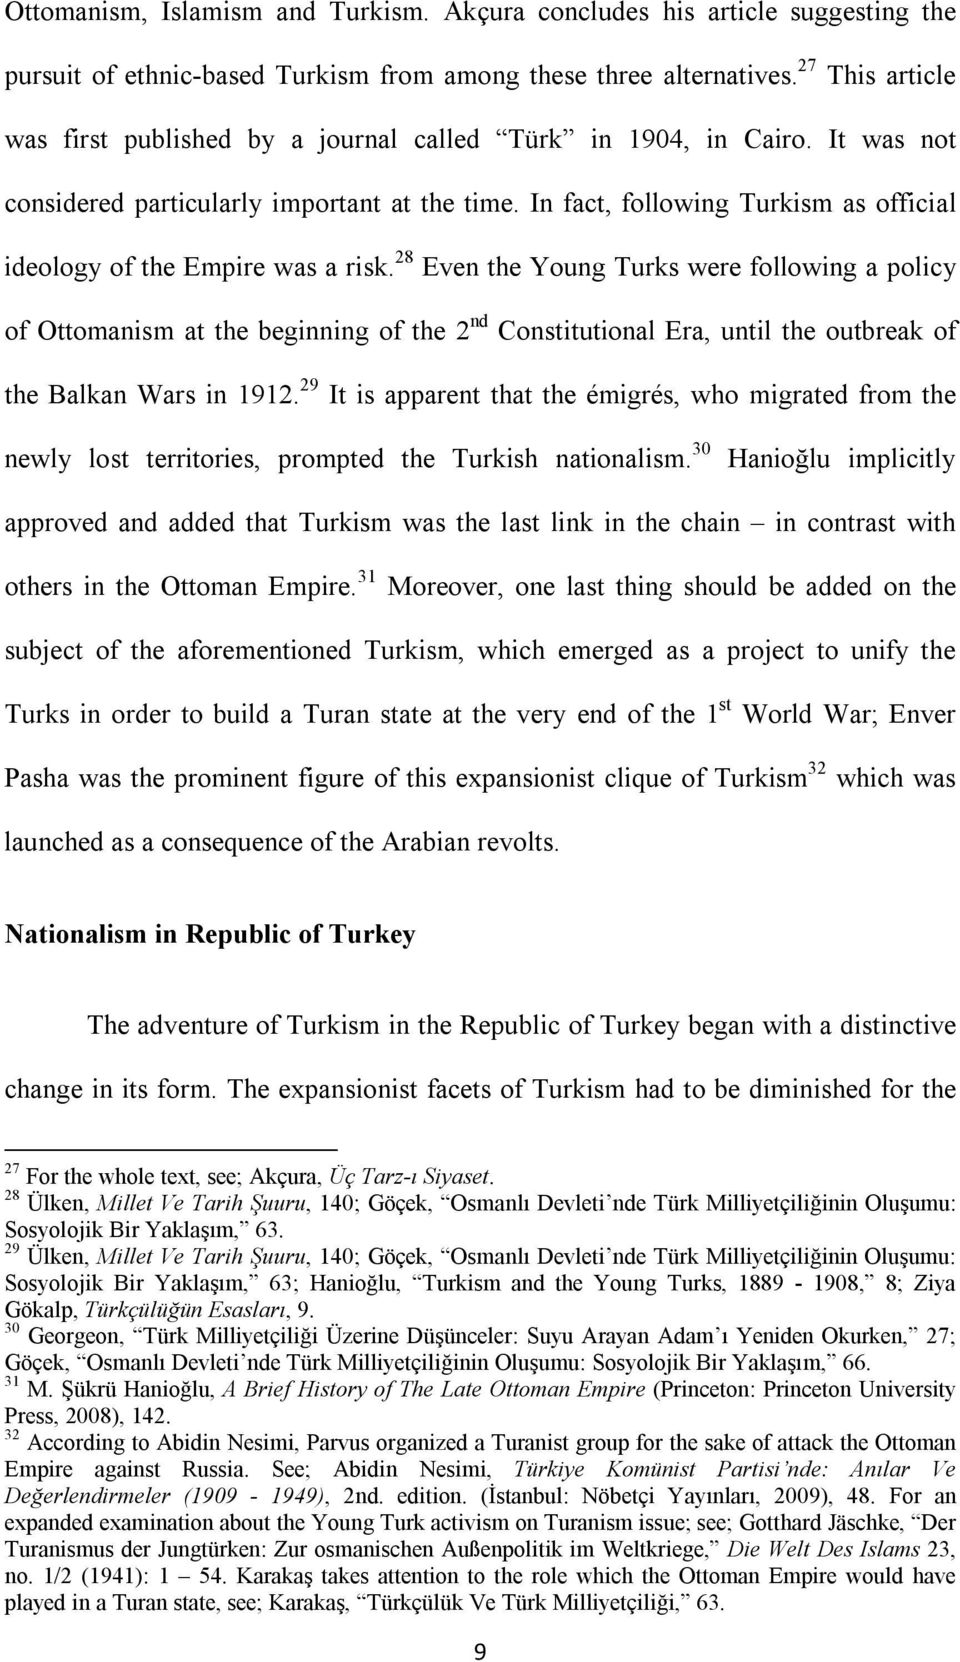 In fact, following Turkism as official ideology of the Empire was a risk.